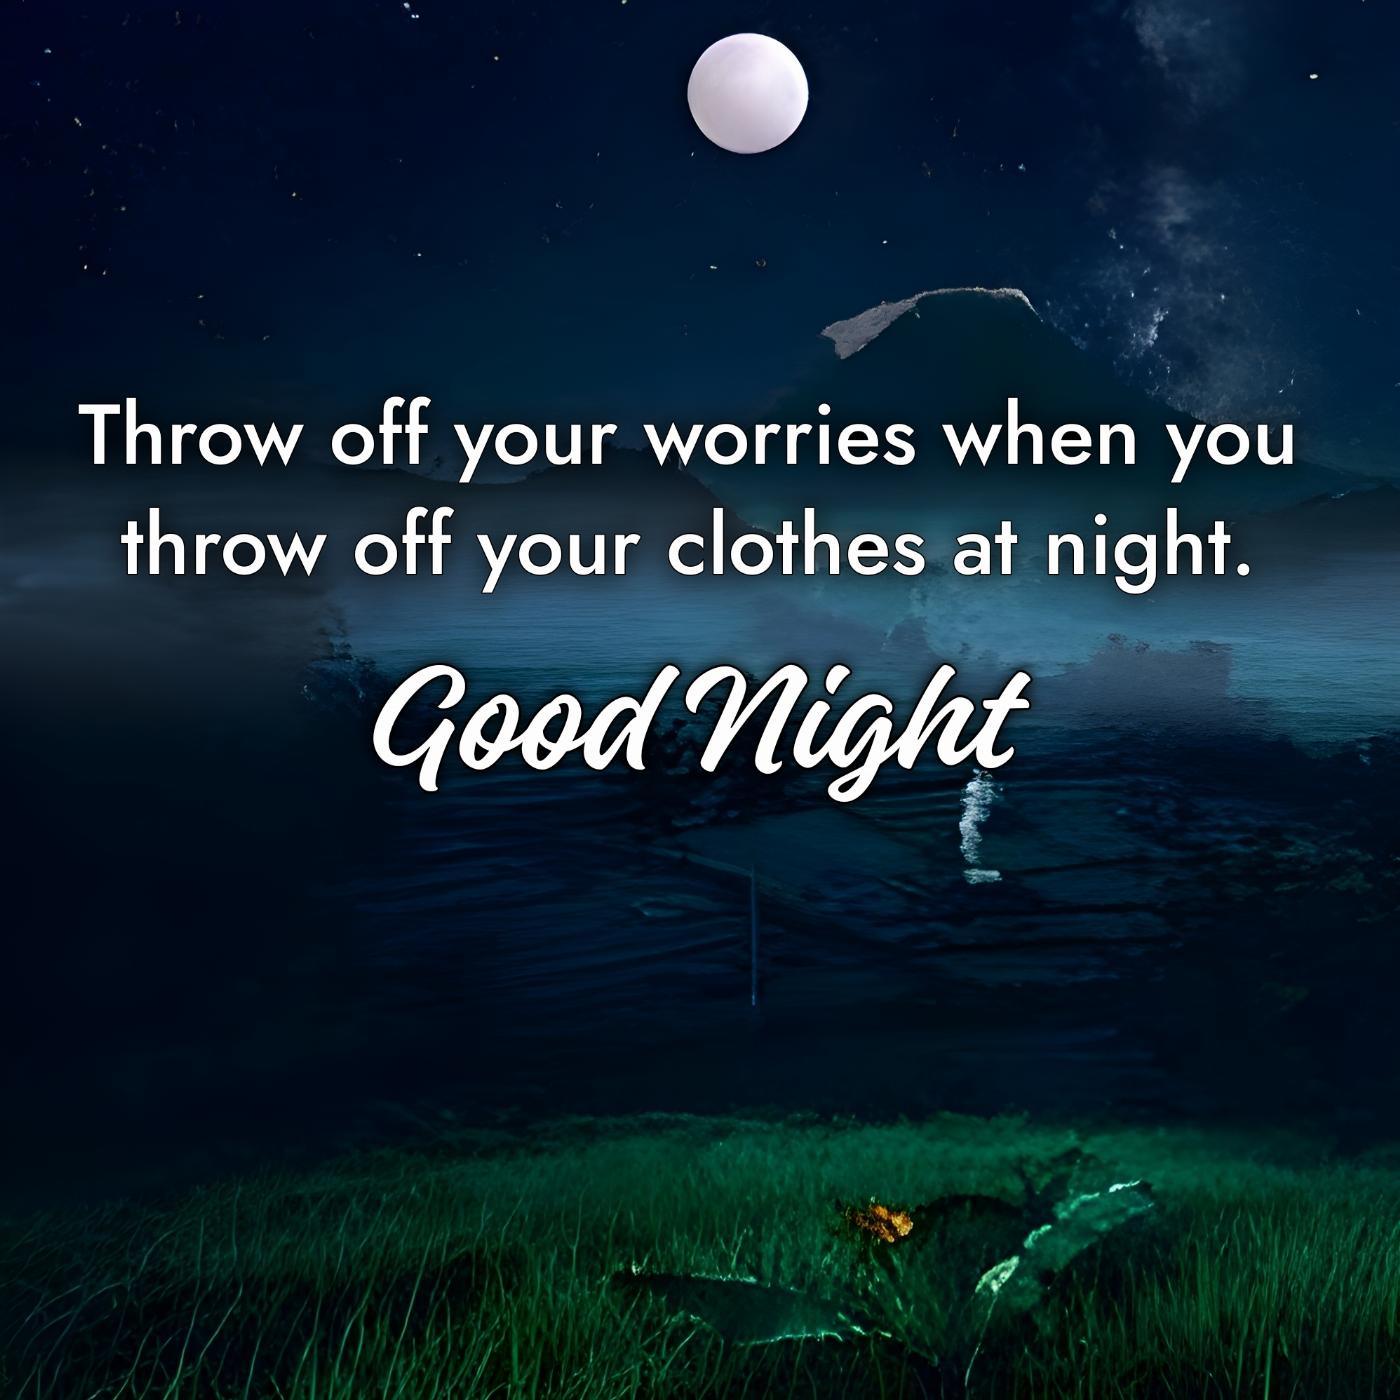 Throw off your worries when you throw off your clothes at night